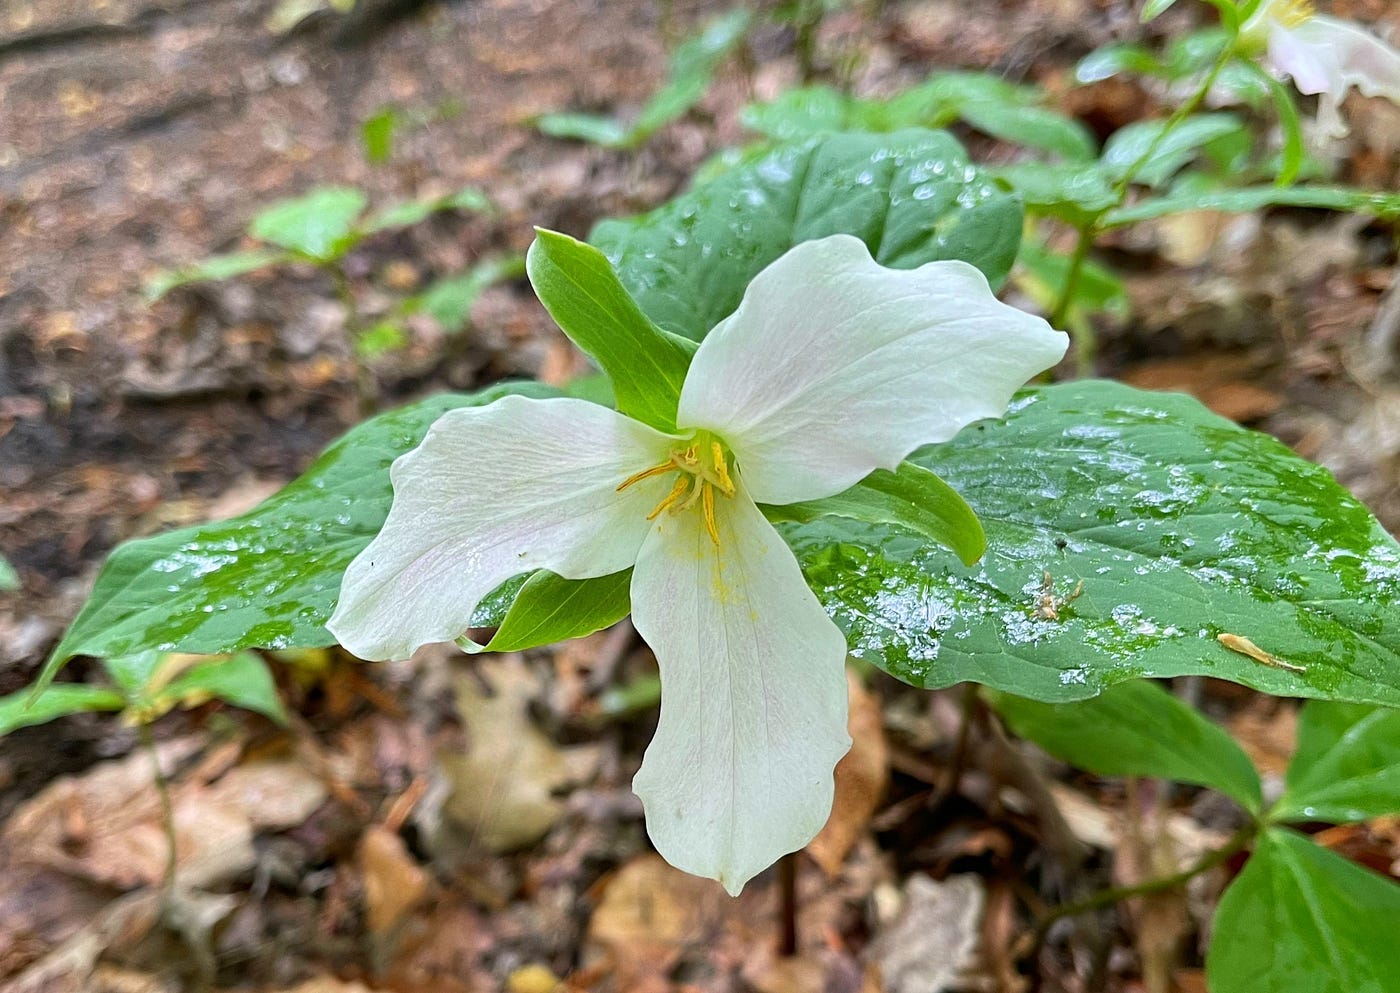 A white flower with three leaves, on the background, more green leaves.